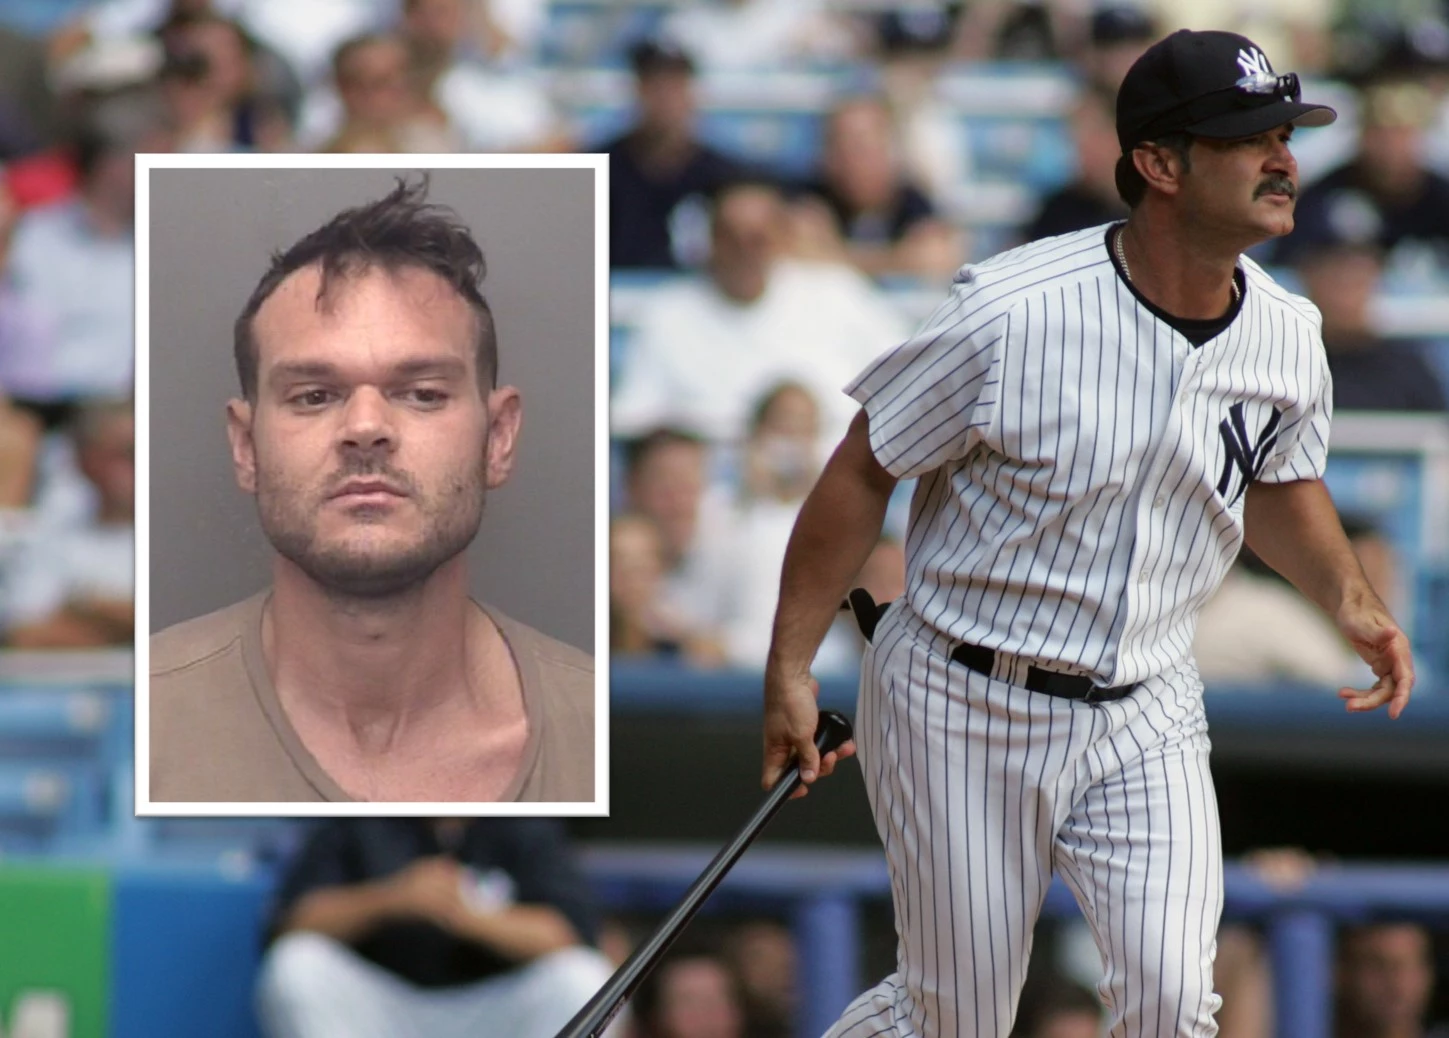 Don Mattingly's son wrecked car while drunk, tried to sell it: cops